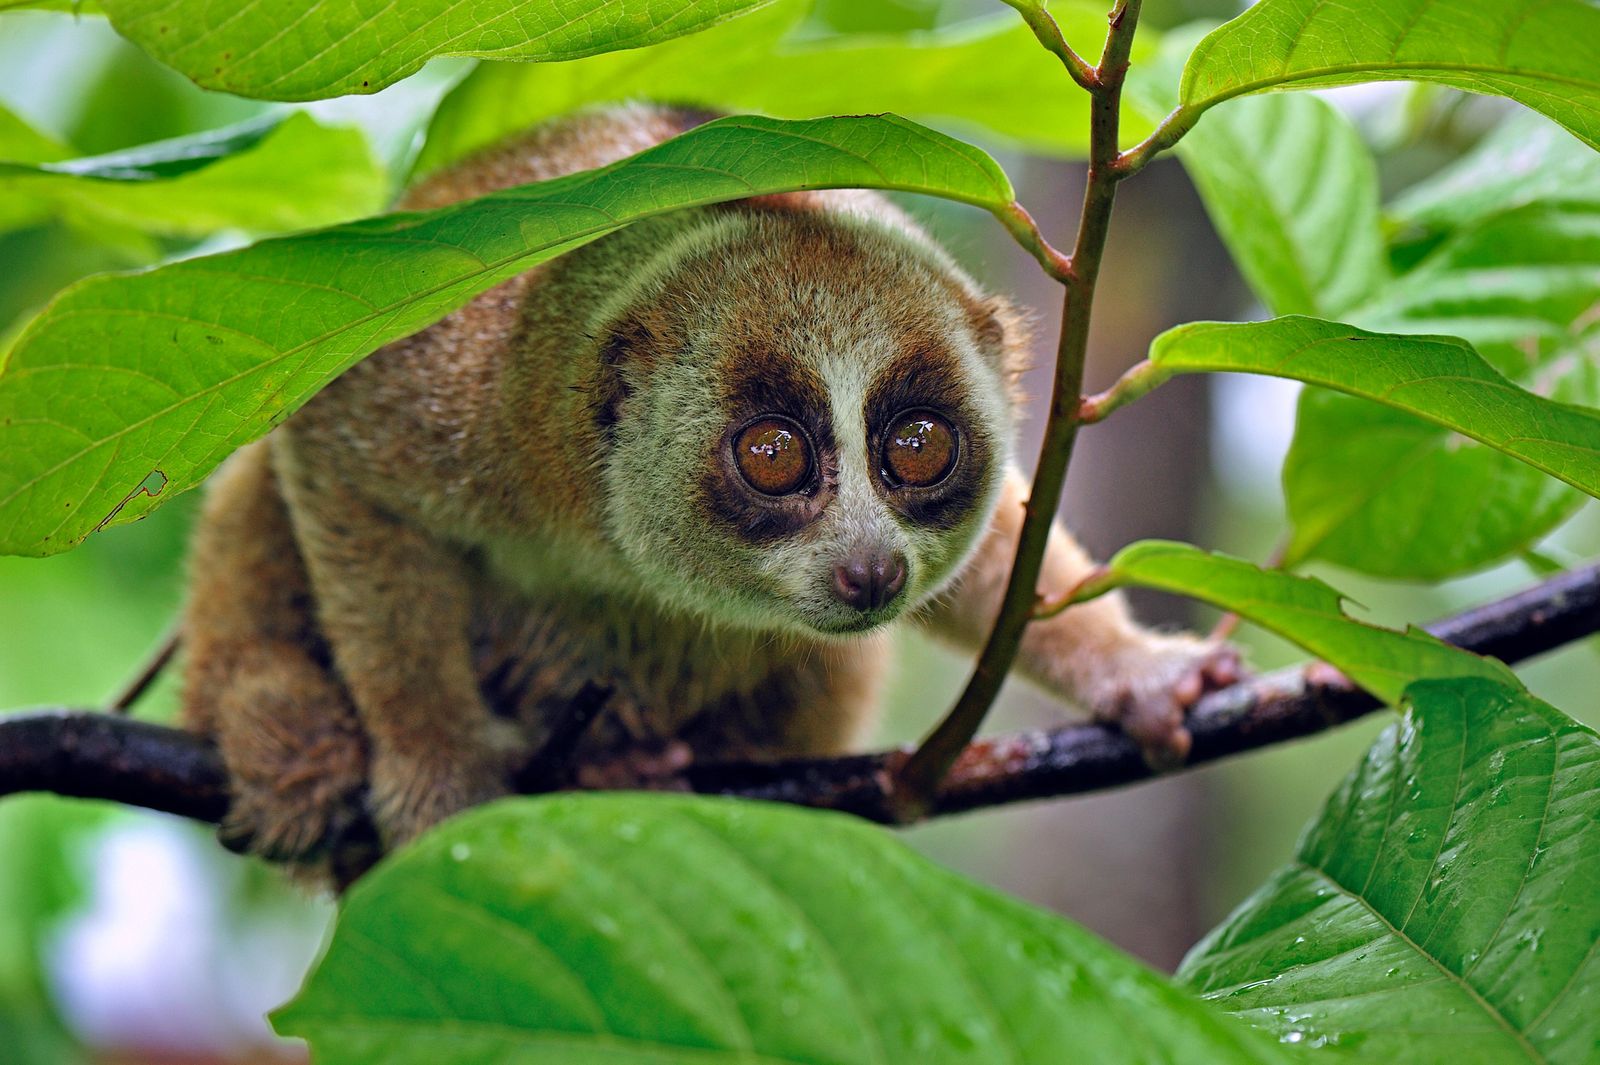 Slow lorises have snake-like markings, postures and a hiss that all resembl...